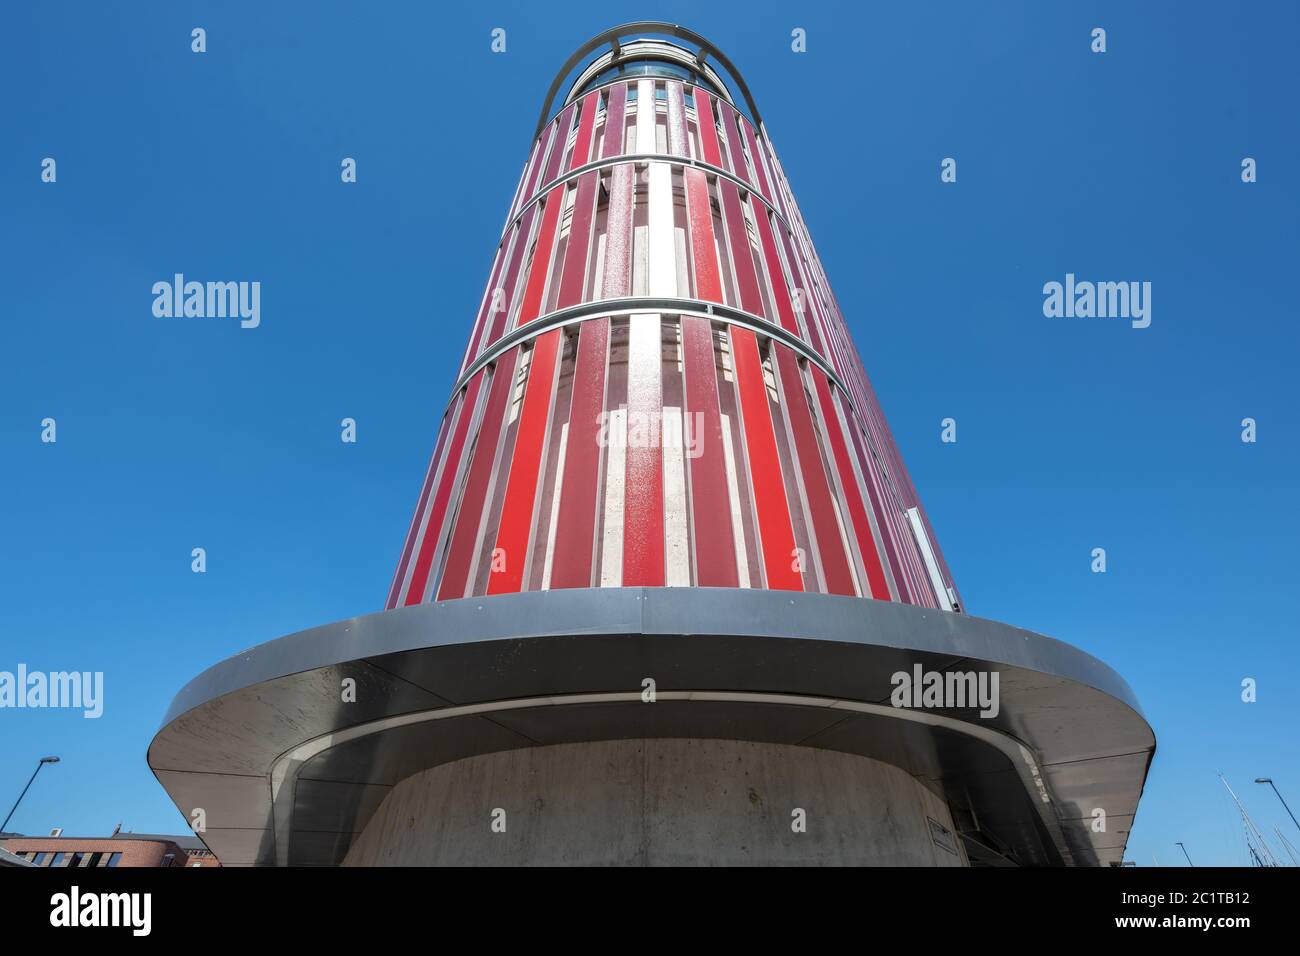 Wismar, Germany, June 16, 2020: Public multi storey car parking garage in the old harbor of Wismar, Germany, modern architecture against a blue sky Stock Photo